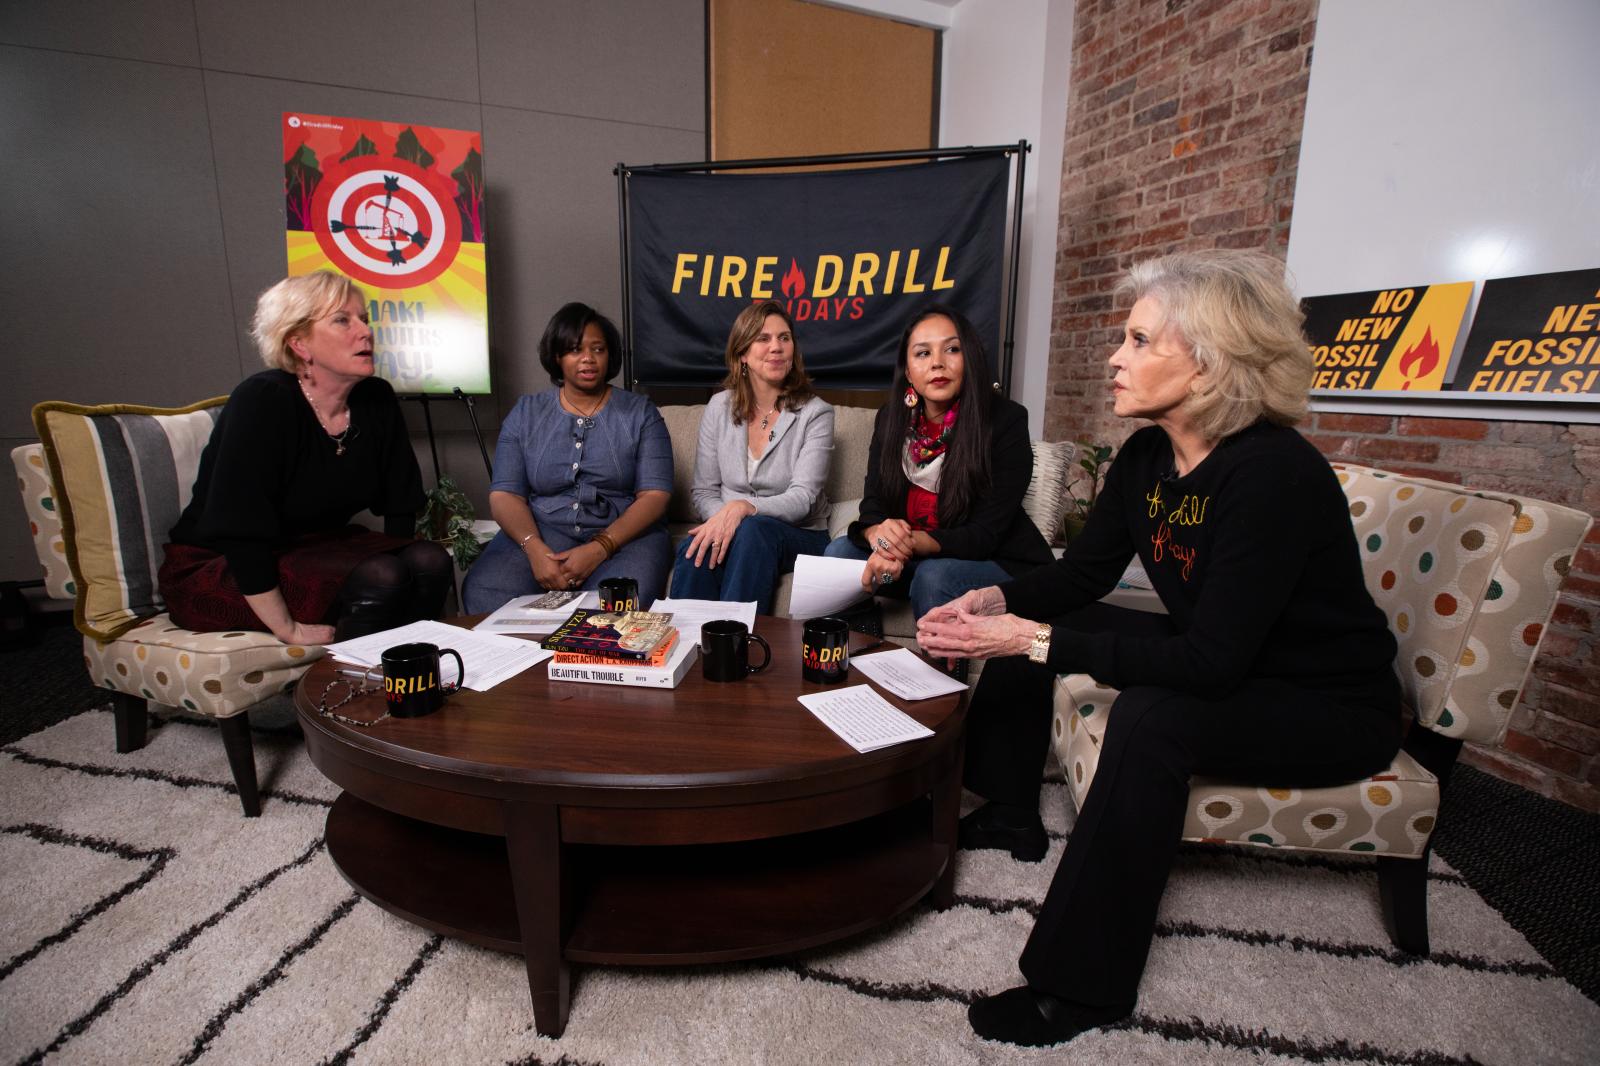 WASHINGTON, DC - JANUARY 2nd: Actress Jane Fonda while hosting a panel titled "Fire Drill Friday" to discuss Climate Change consequences with environmental activists in Washington, DC. The actress launched "Fire Drill Friday" to demand Immediate Action for a Green New Deal. Clean renewable energy by 2030, and no new exploration or drilling for Fossil Fuels DC USA